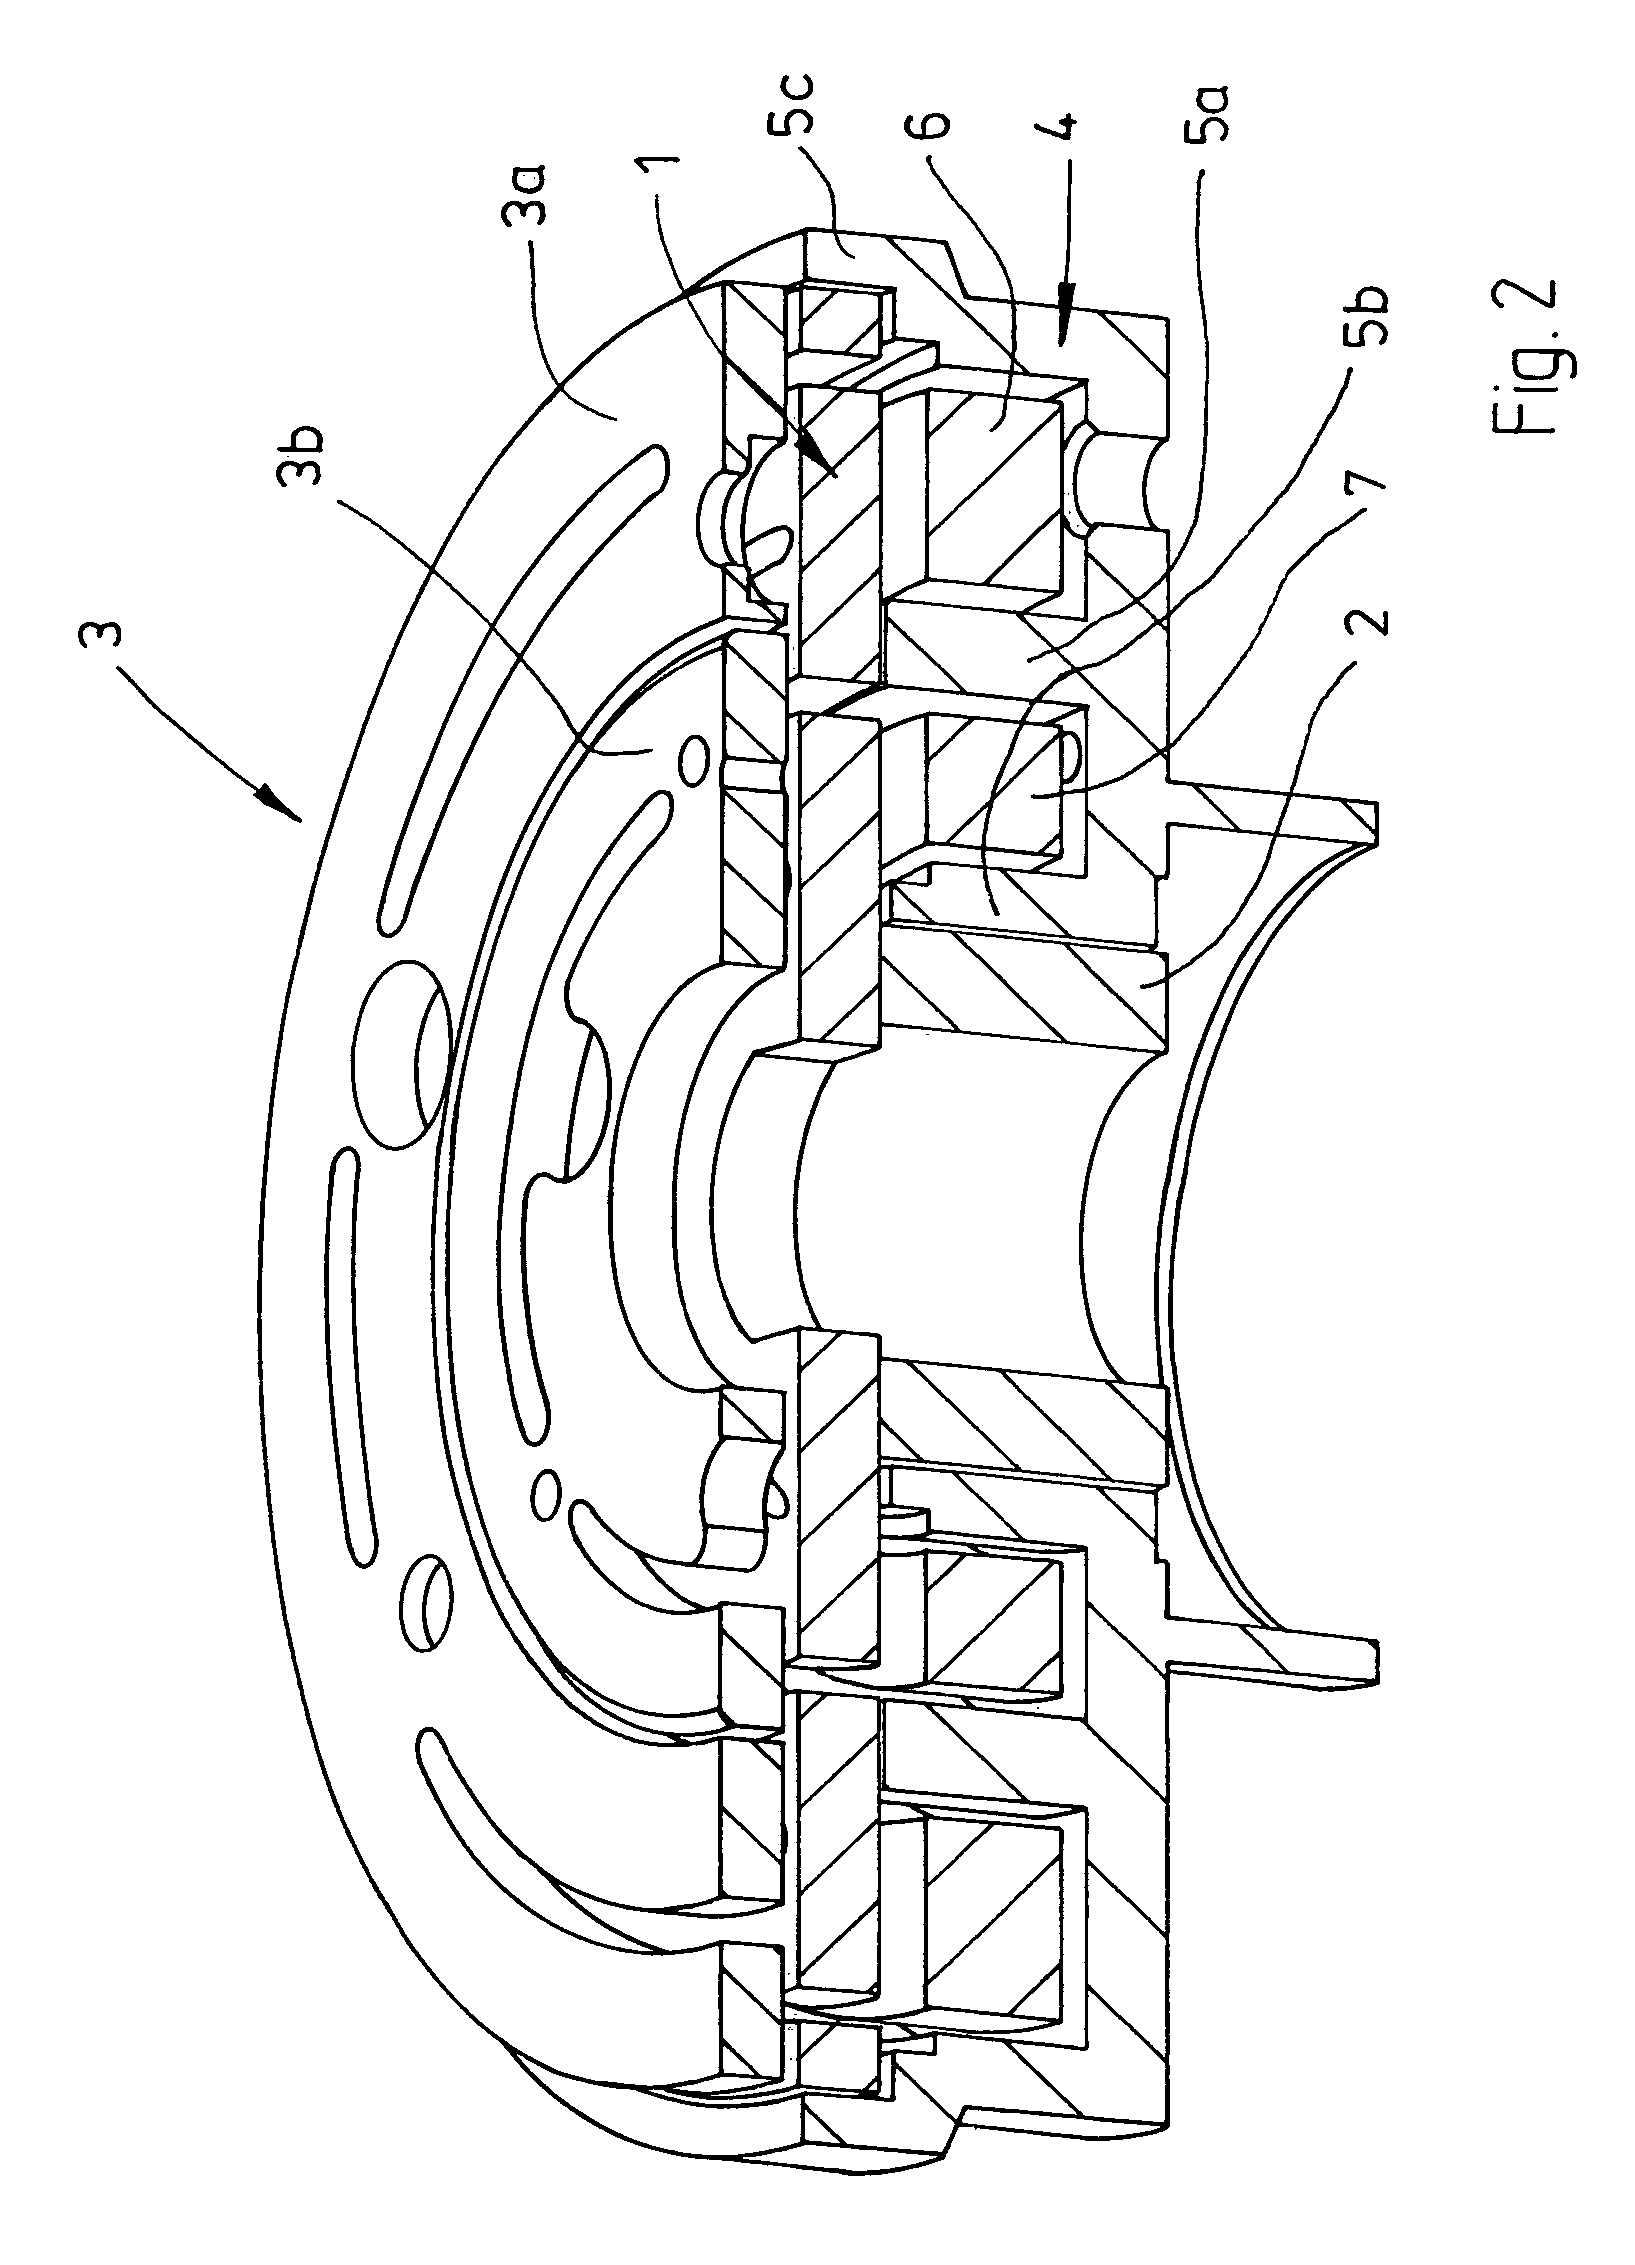 Electromagnetically operated friction disk clutch and rotor for a clutch of this type